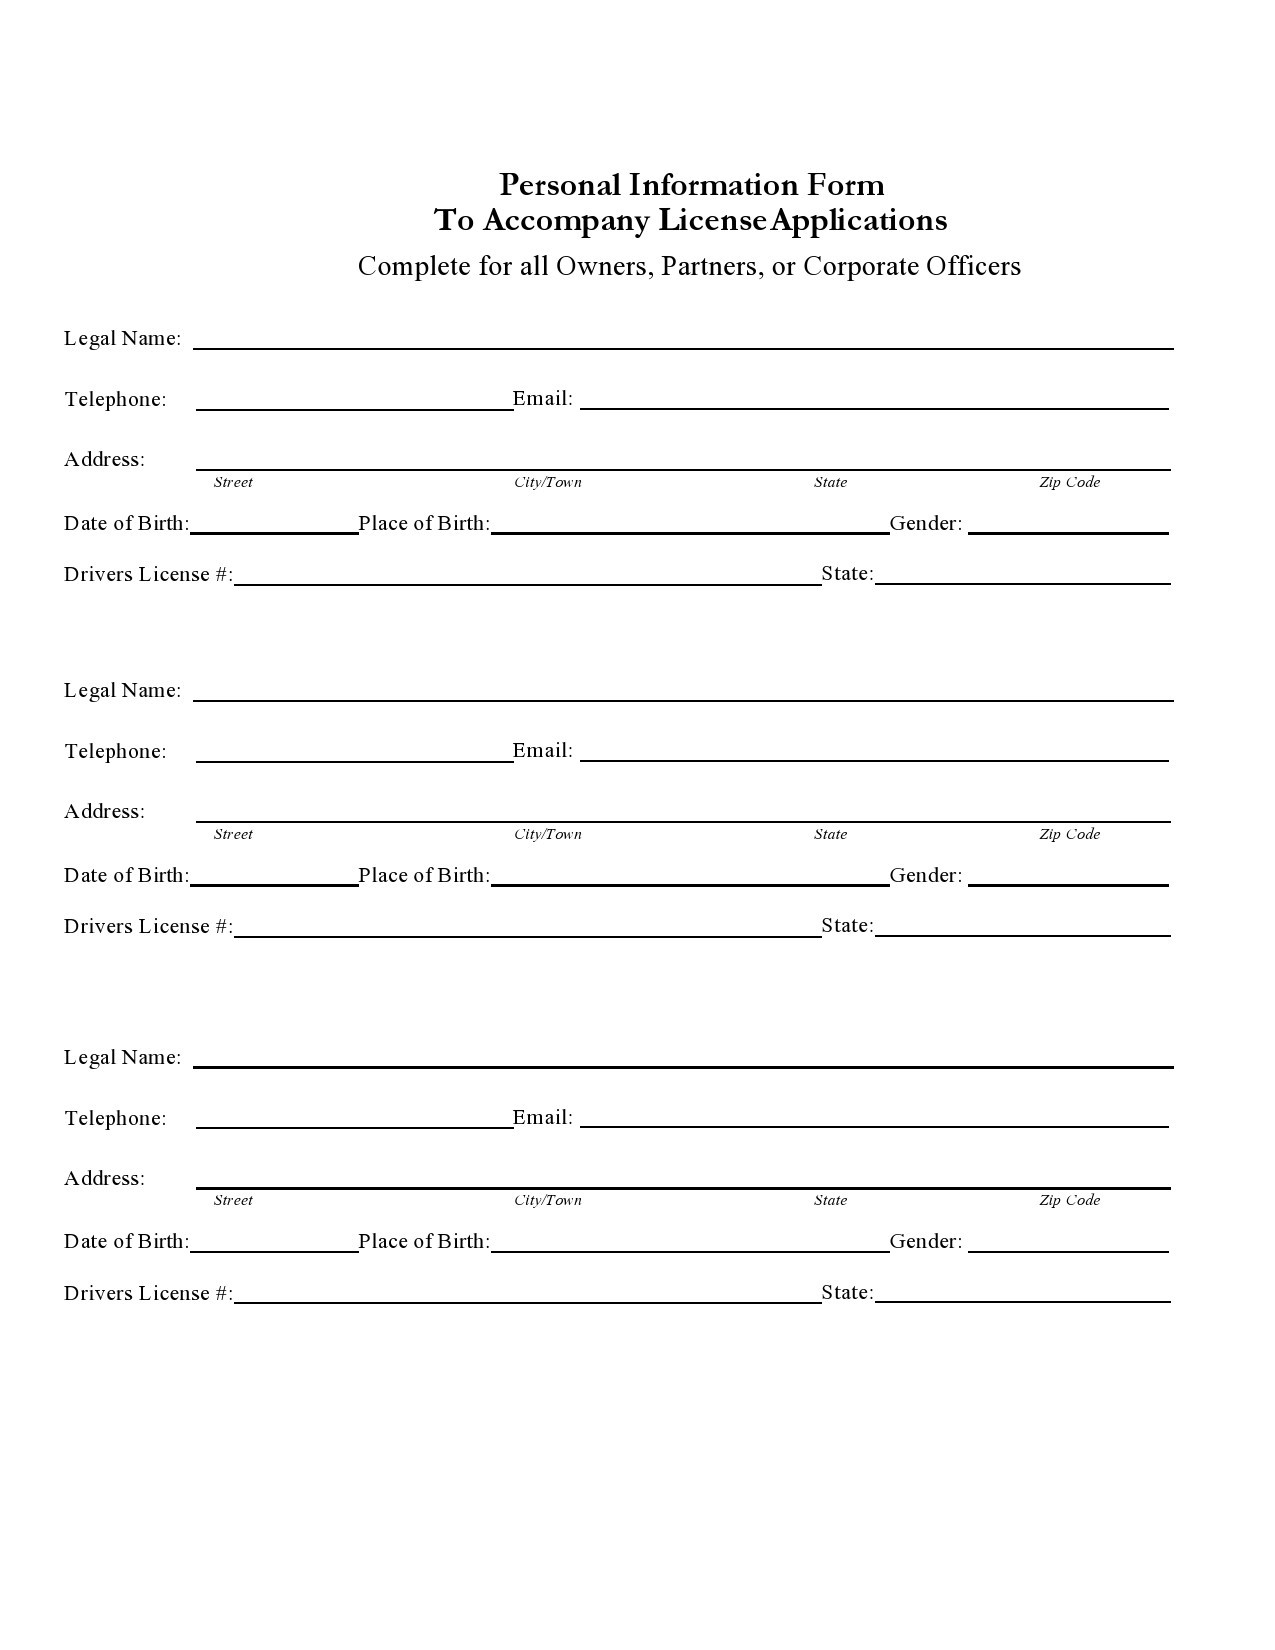 Free personal information form 11